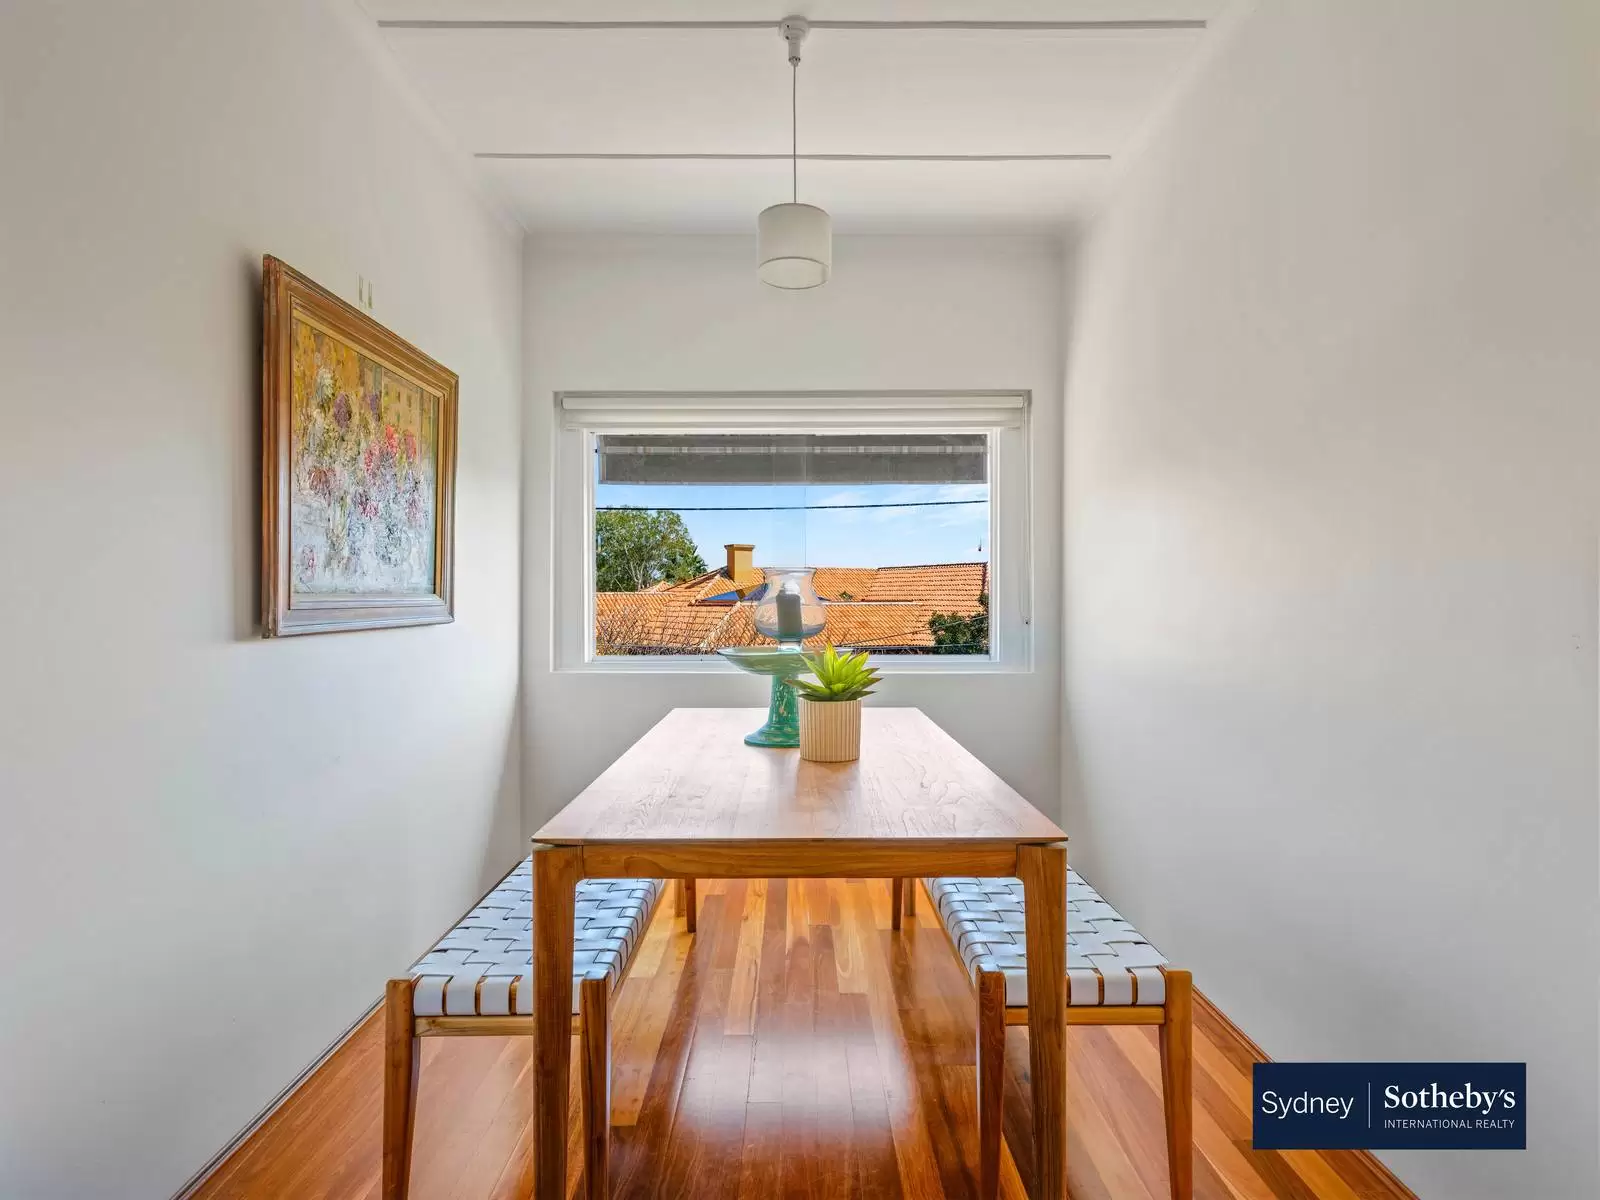 Photo #2: 7/77 Fitzwilliam Road, Vaucluse - For Lease by Sydney Sotheby's International Realty